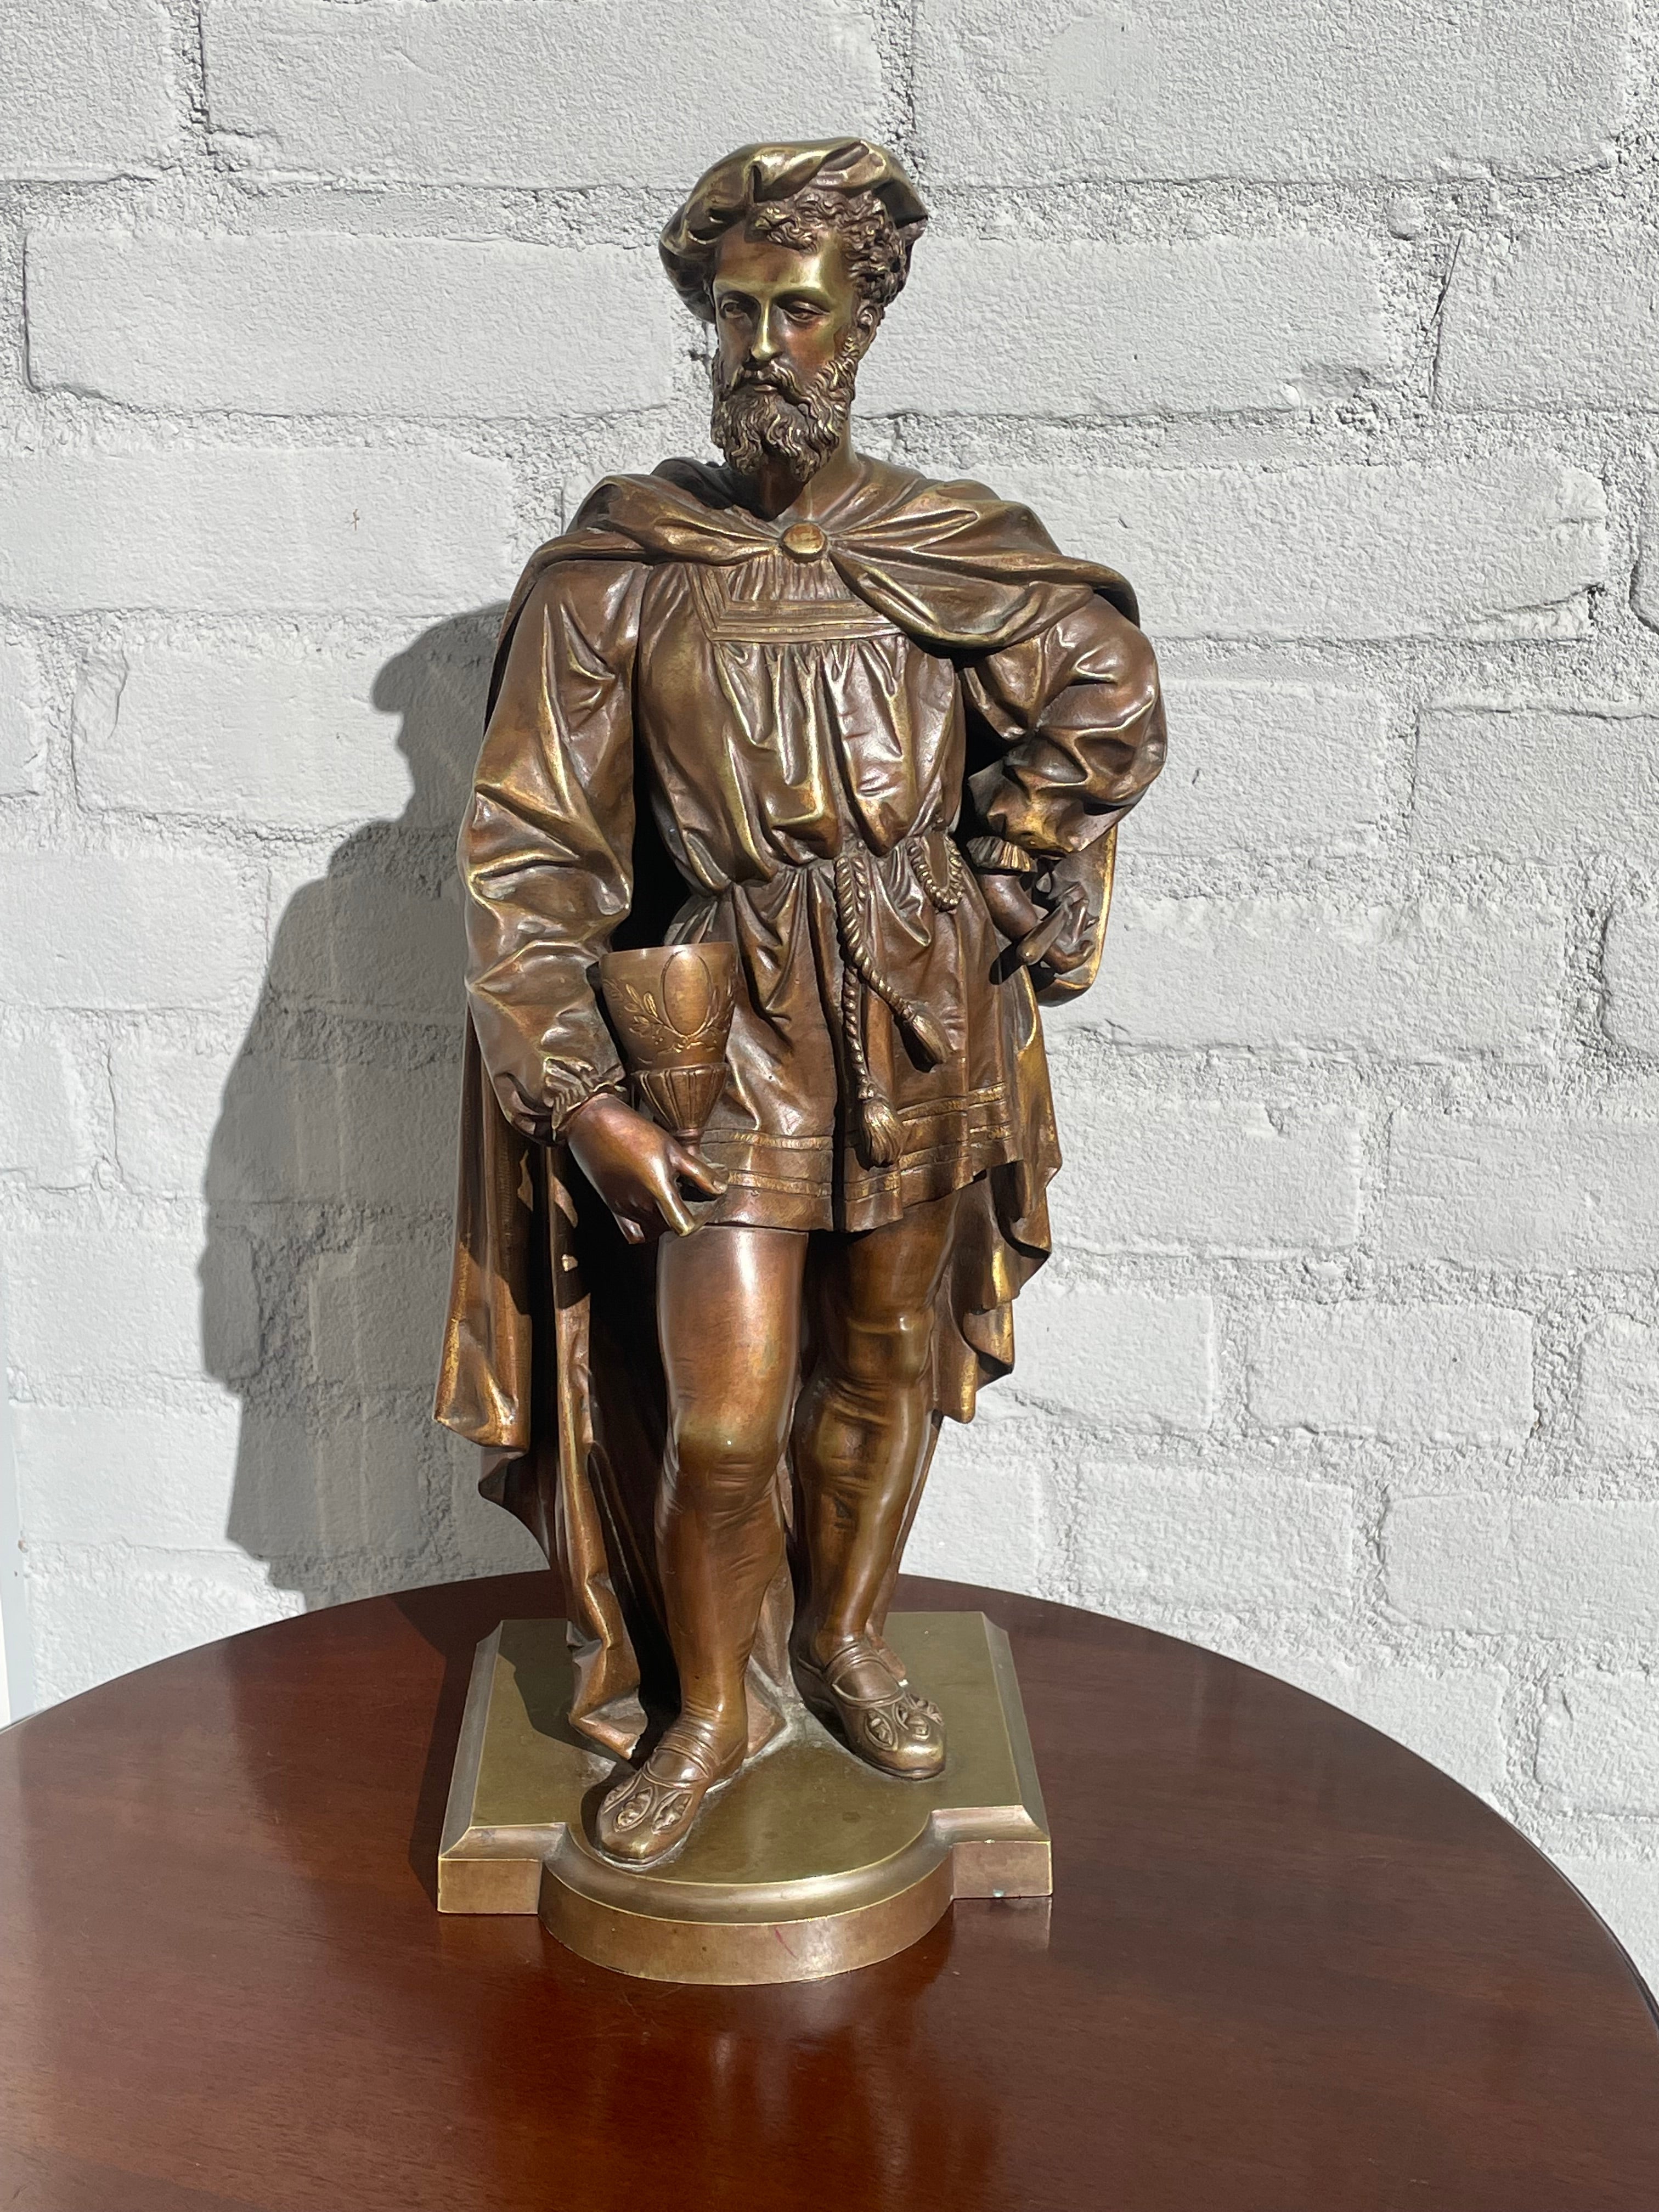 Rare, striking and highly decorative antique bronze sculpture.

This beautifully dressed and perfectly handcrafted bronze sculpture of a merchant from Venice comes with the most wonderful details. It does not take a trained eye to see the quality